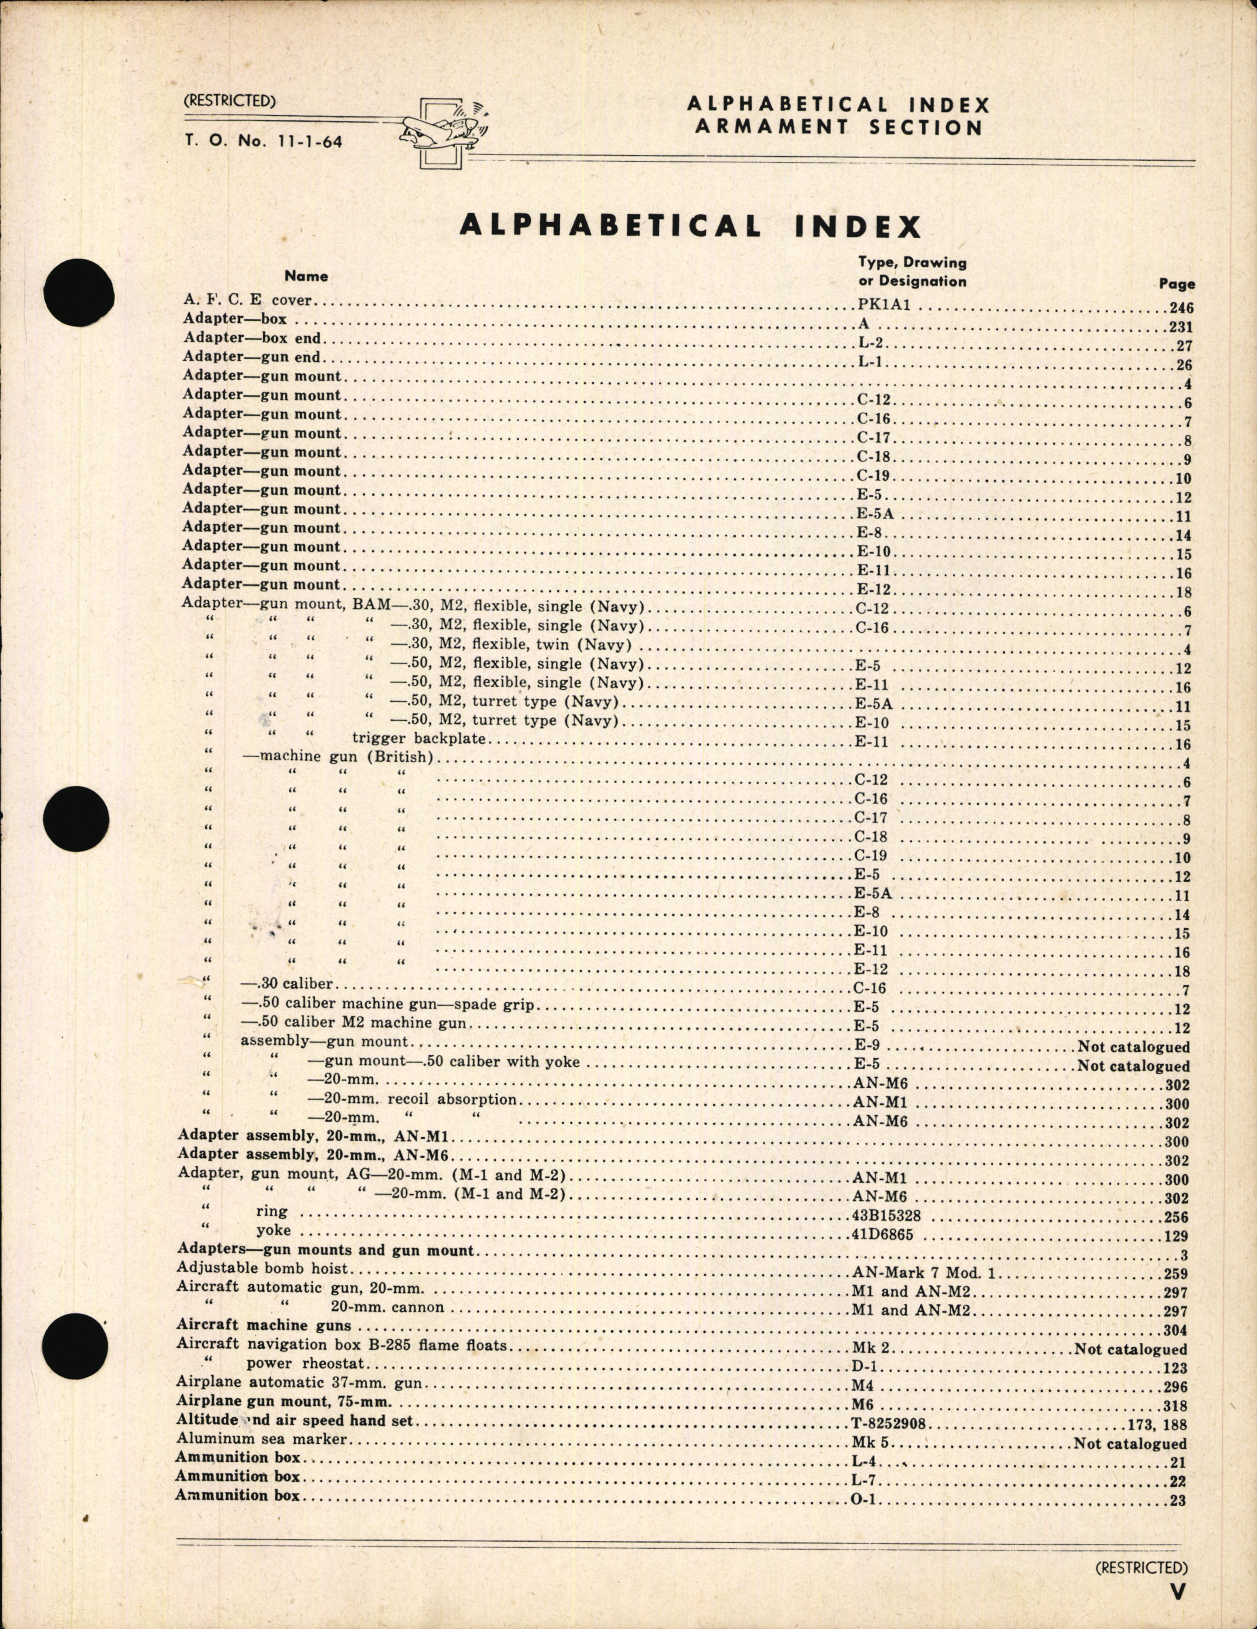 Sample page 5 from AirCorps Library document: Index of Army-Navy Aeronautical Equipment - Armament